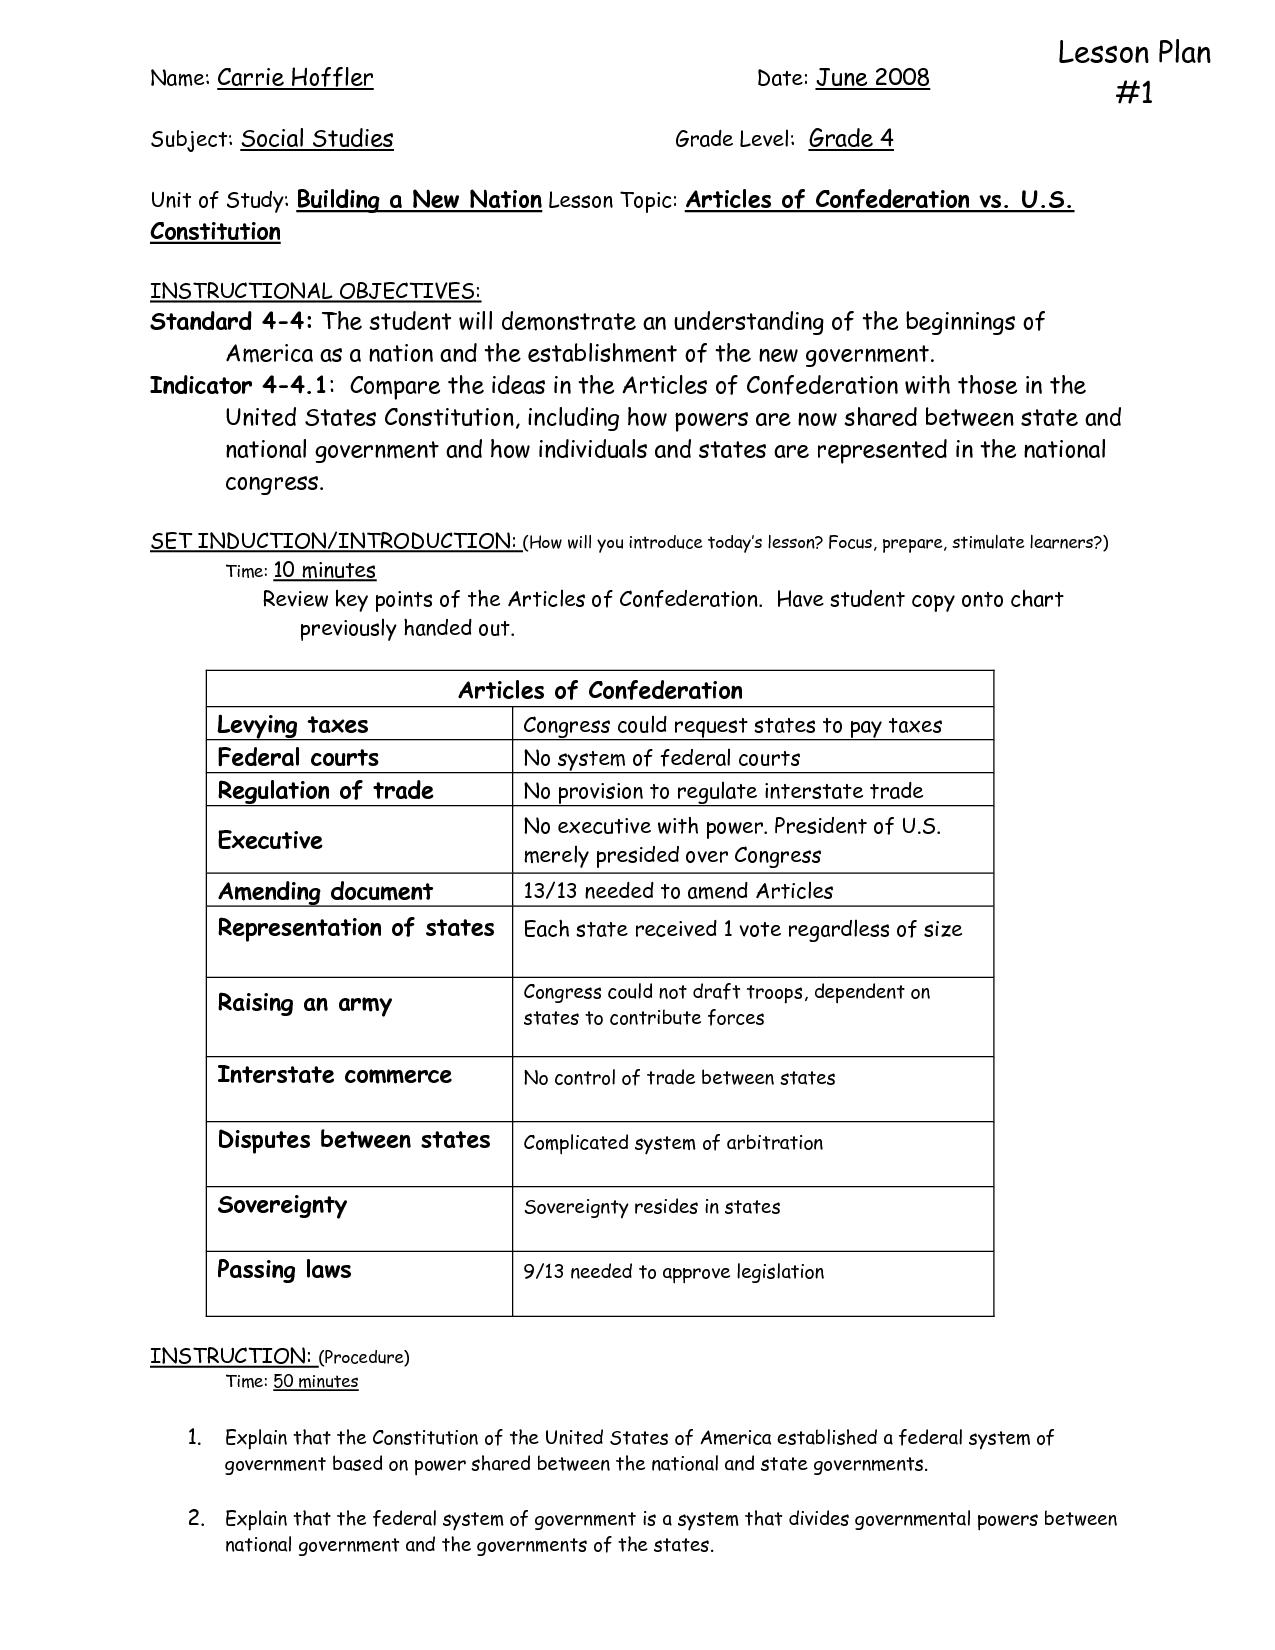 8-best-images-of-the-u-s-constitution-worksheet-answers-united-states-preamble-constitution